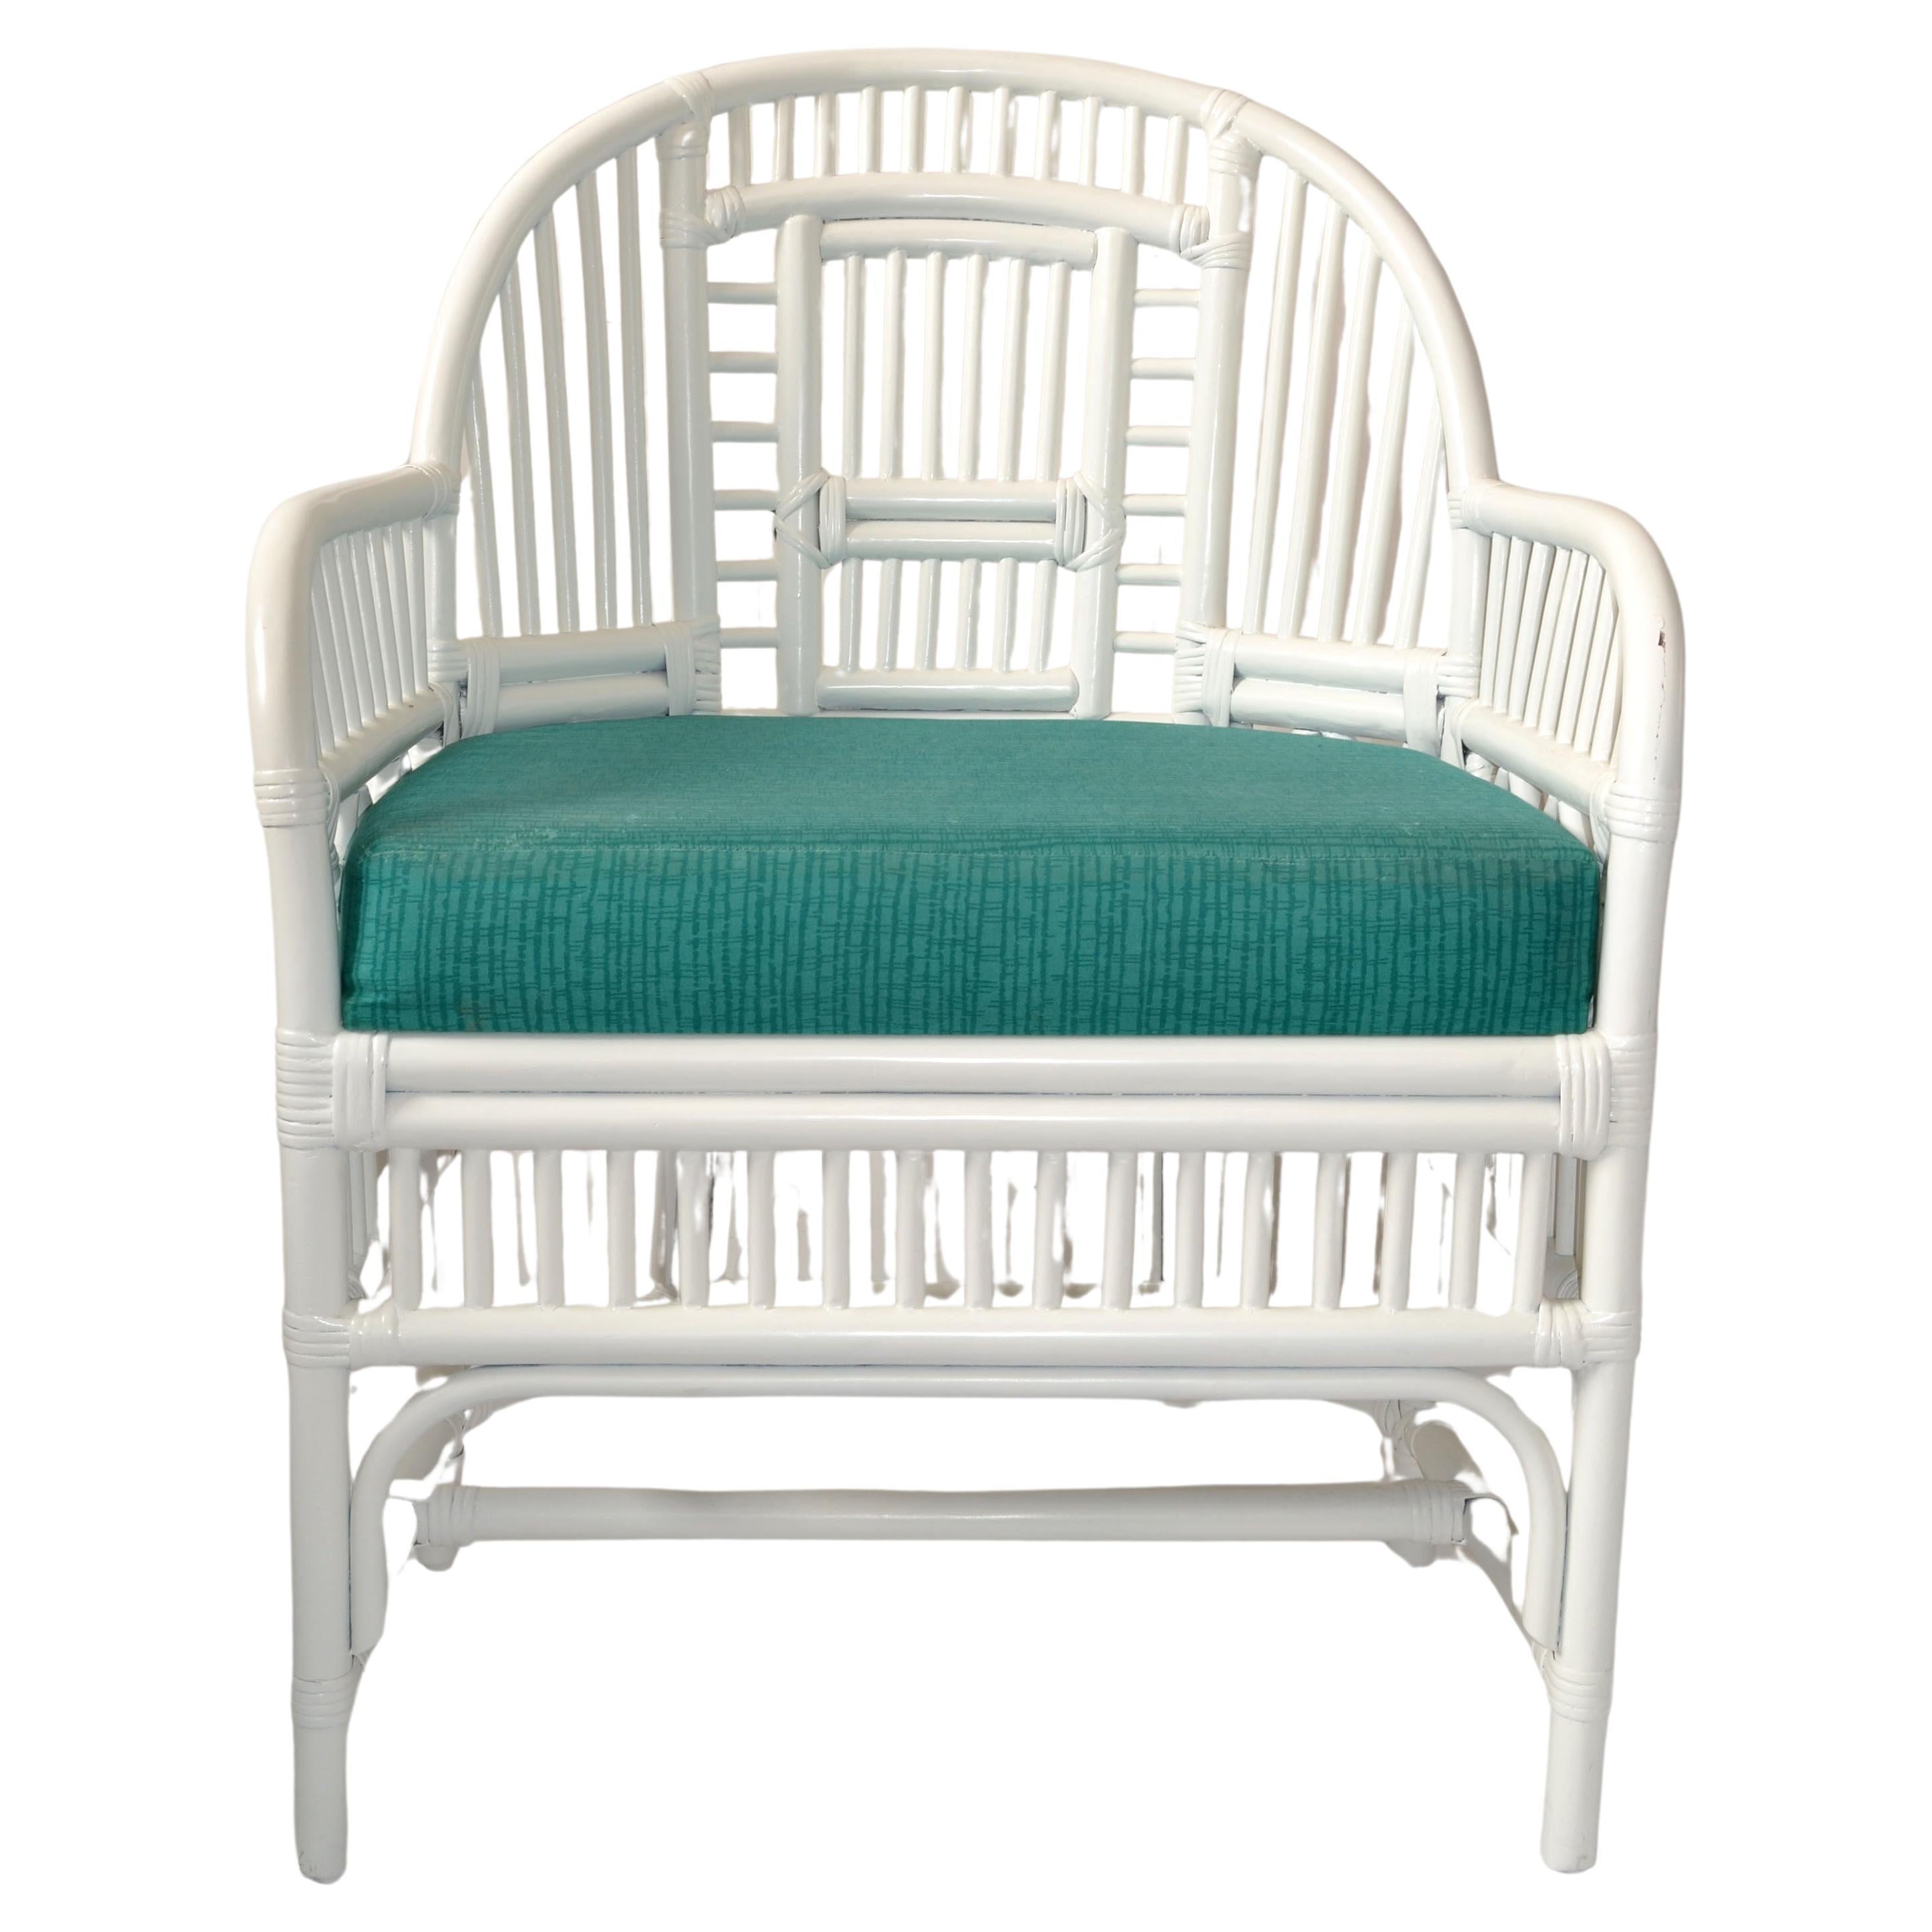 Vintage white finish bamboo, caning and split reed armchair green seat cushion on six legs. This is a handcrafted chair with woven cane seat features bamboo frames and Chinese inspired bamboo patterns.
The backrest is designed with an extraordinary